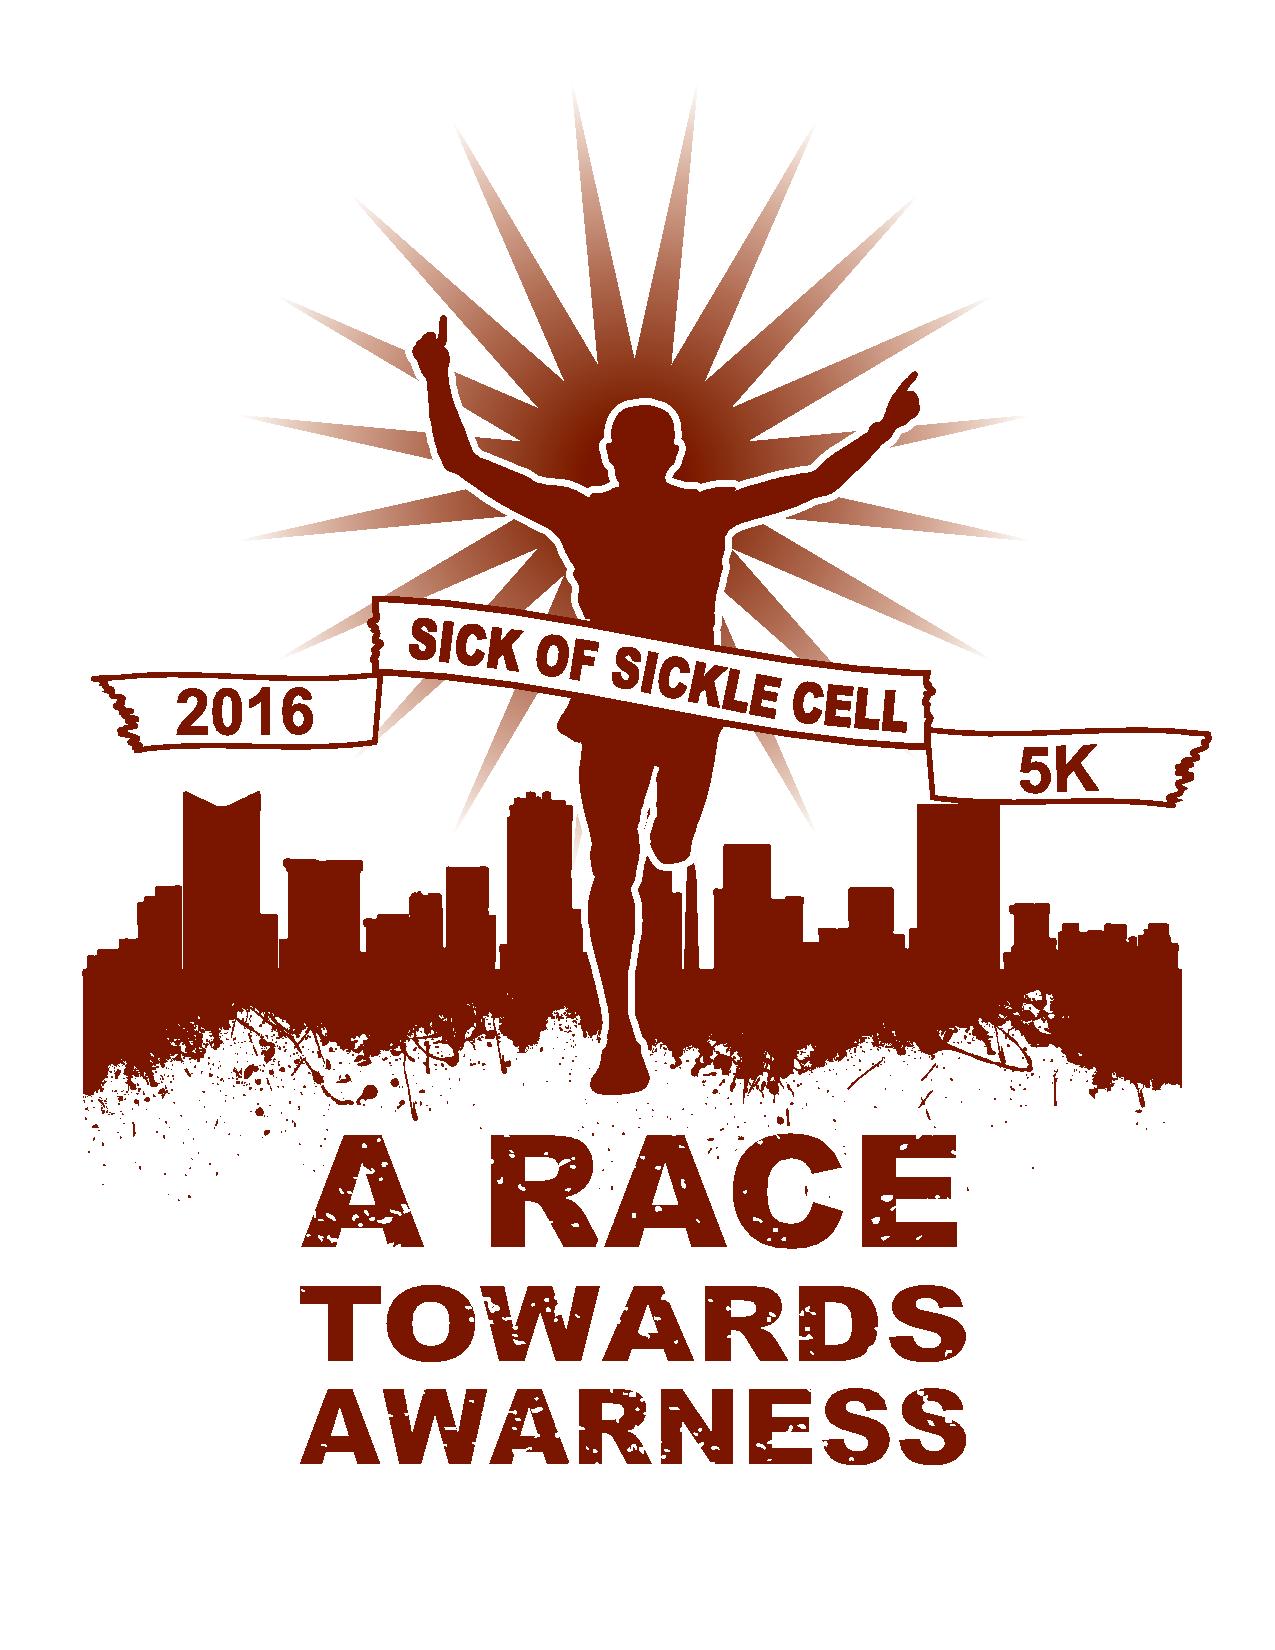 Sick of Sickle Cell Run